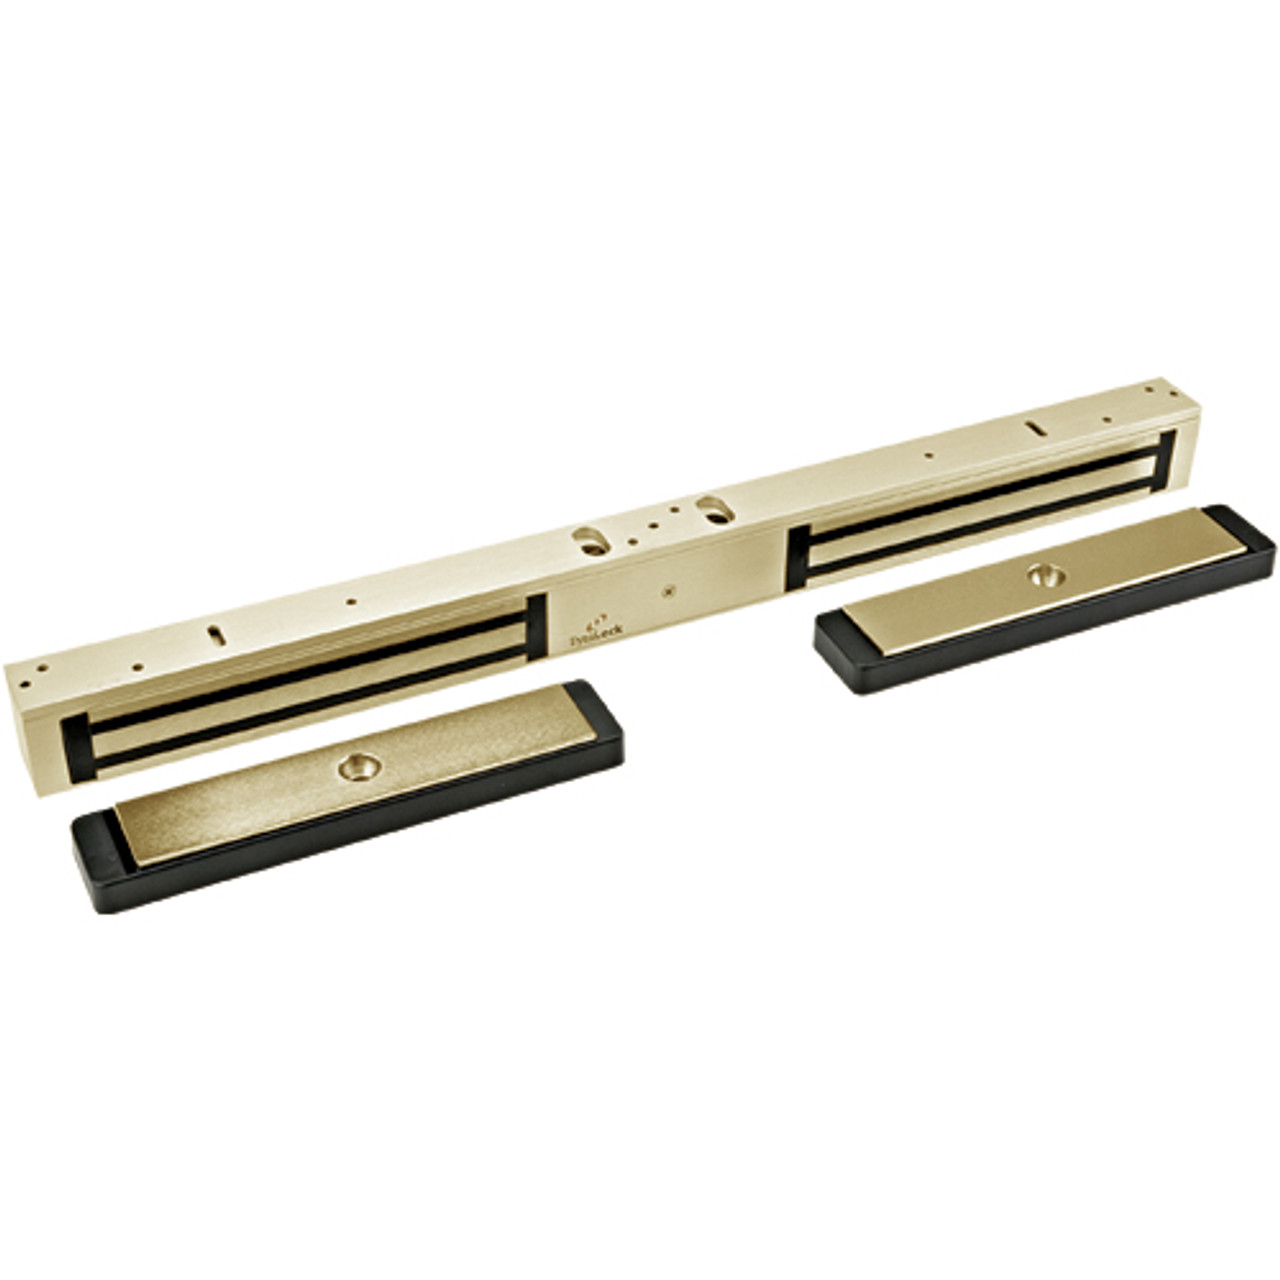 2282-US4-HSM2 DynaLock 2280 Series Double SlimLine Electromagnetic Lock for Outswing Door With HSM in Satin Brass